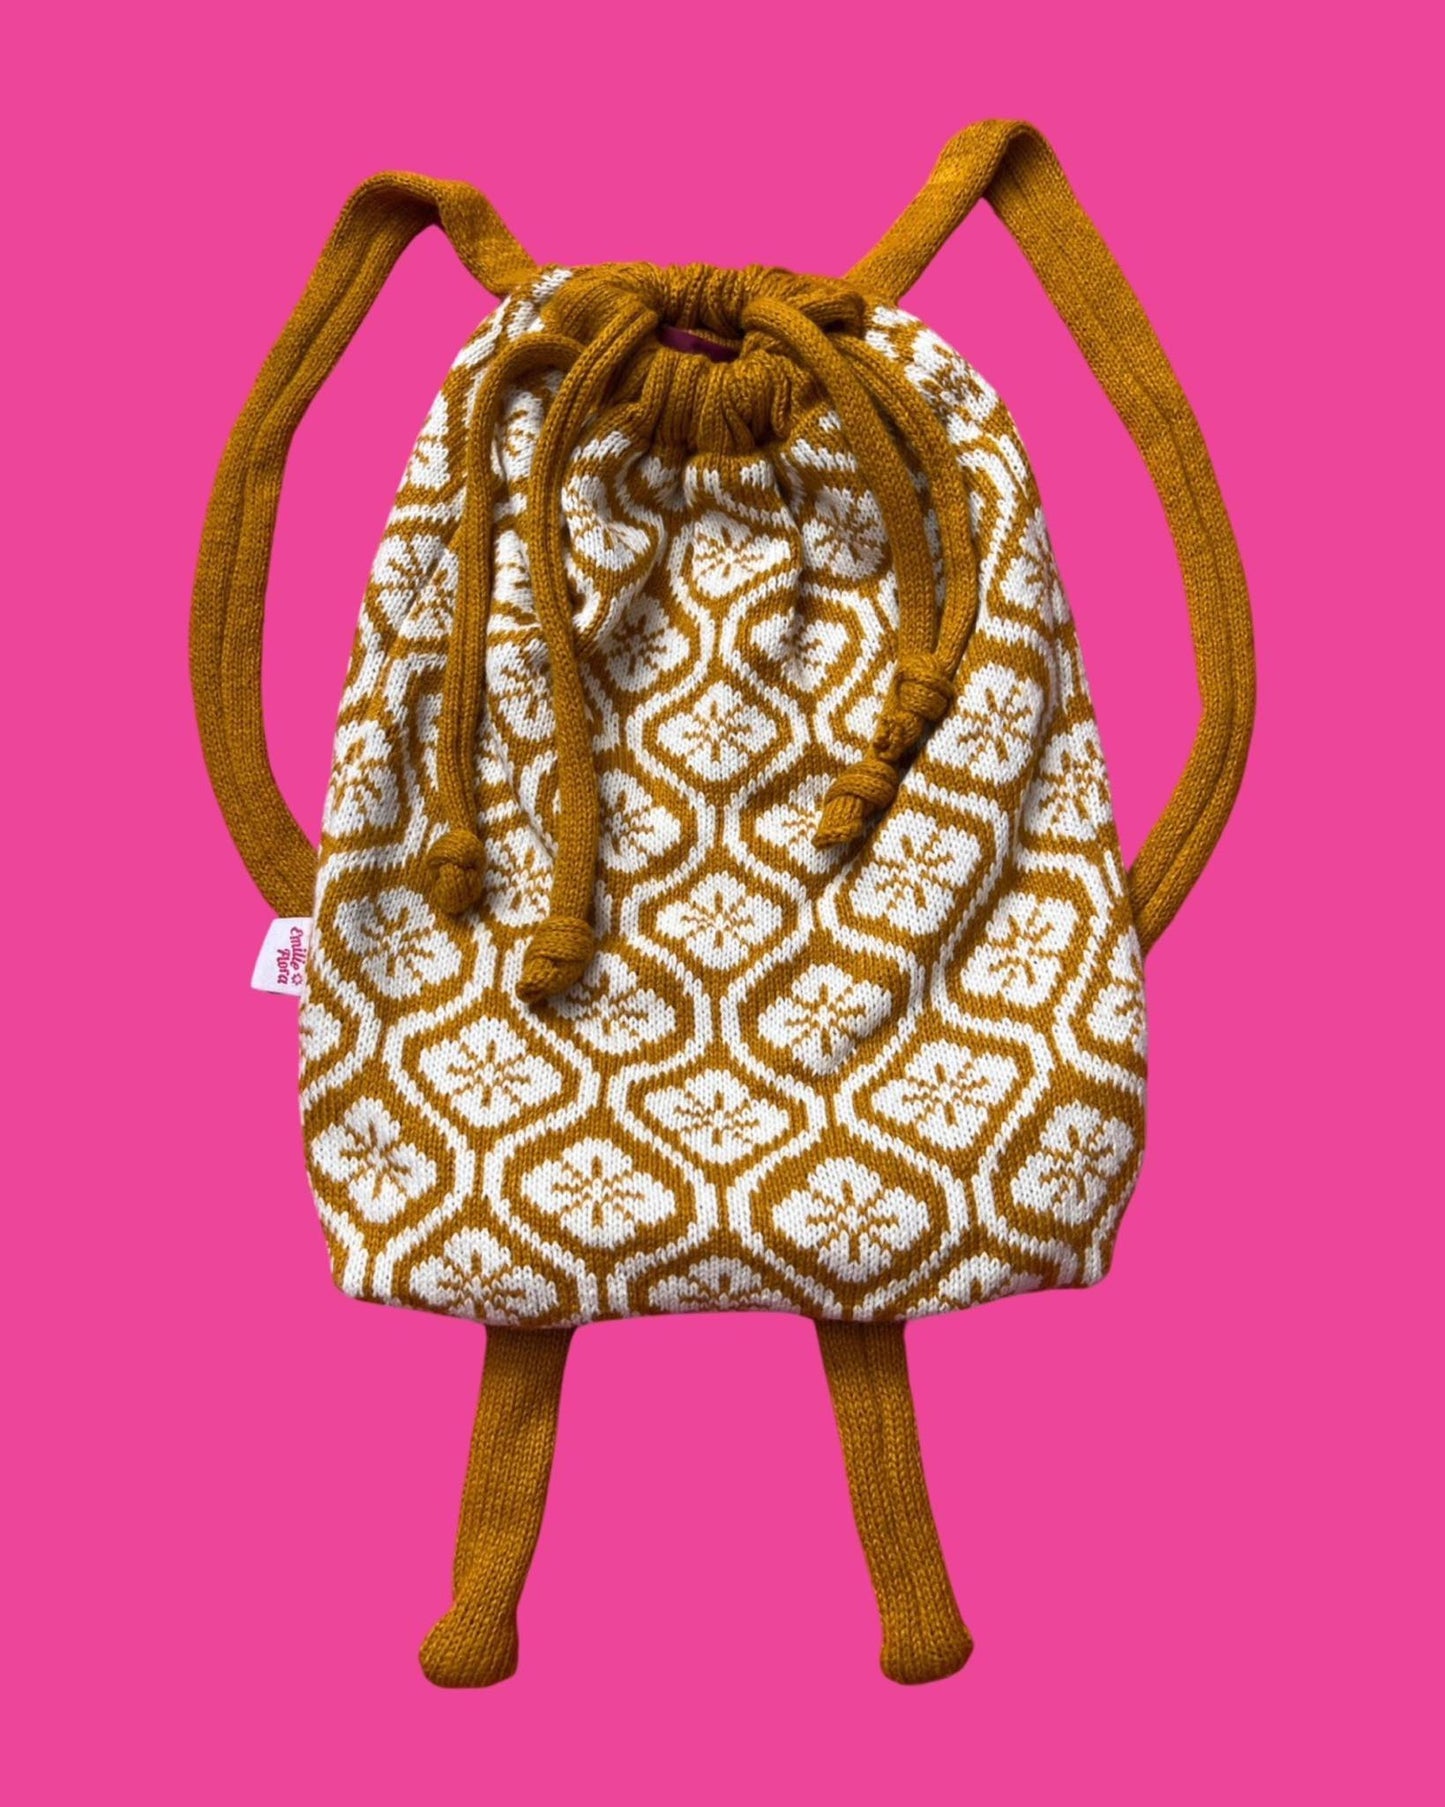 Backpack - Flower Power Ochre and Cream - READY TO SHIP